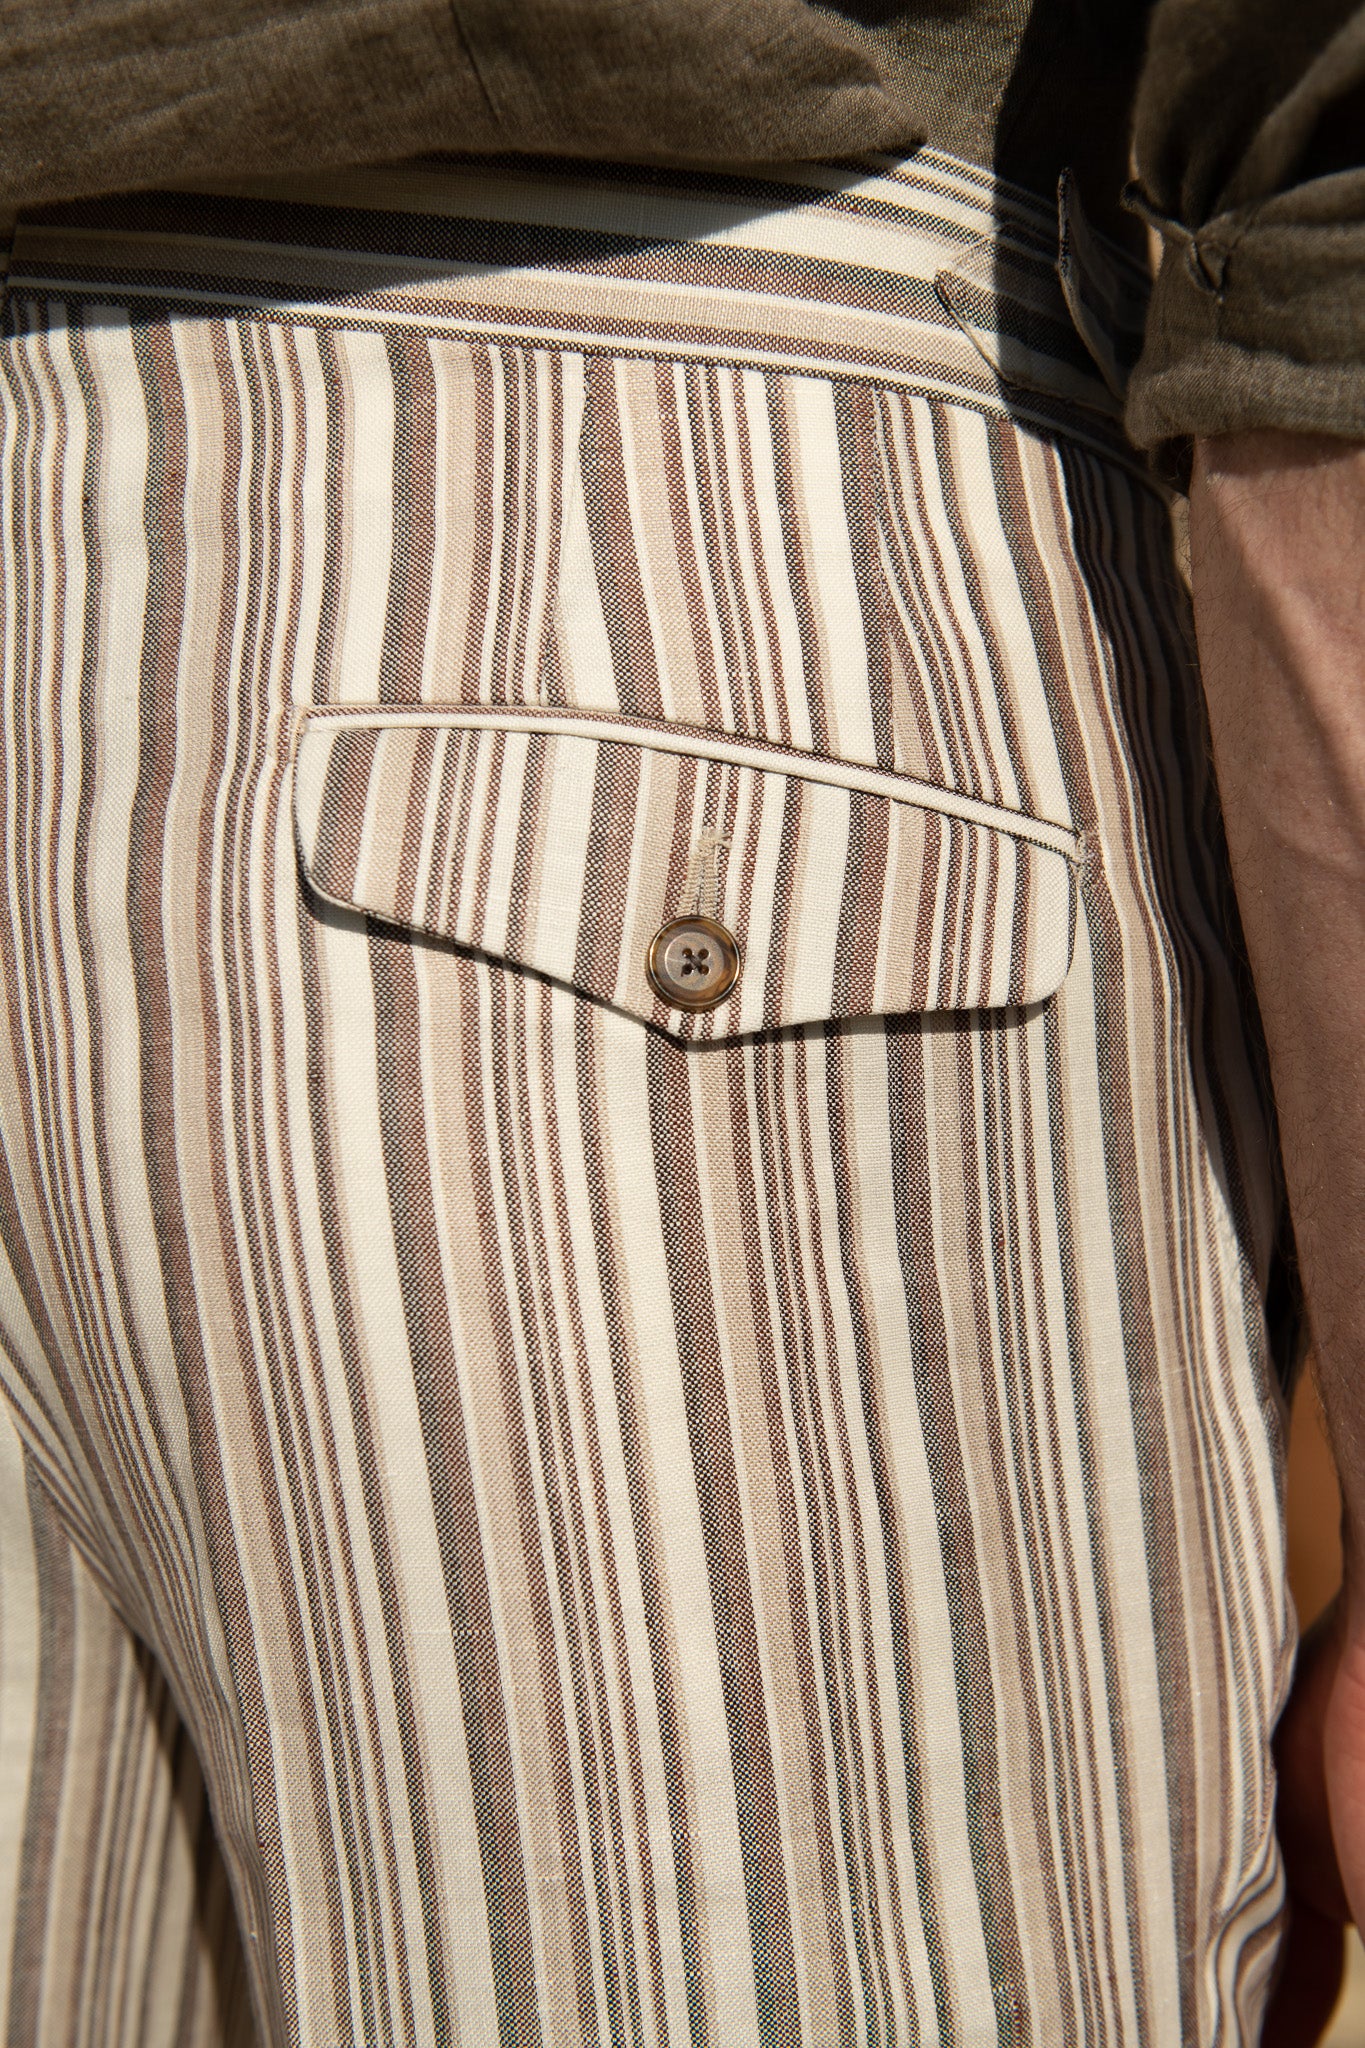 Striped linen shorts - Made in Italy